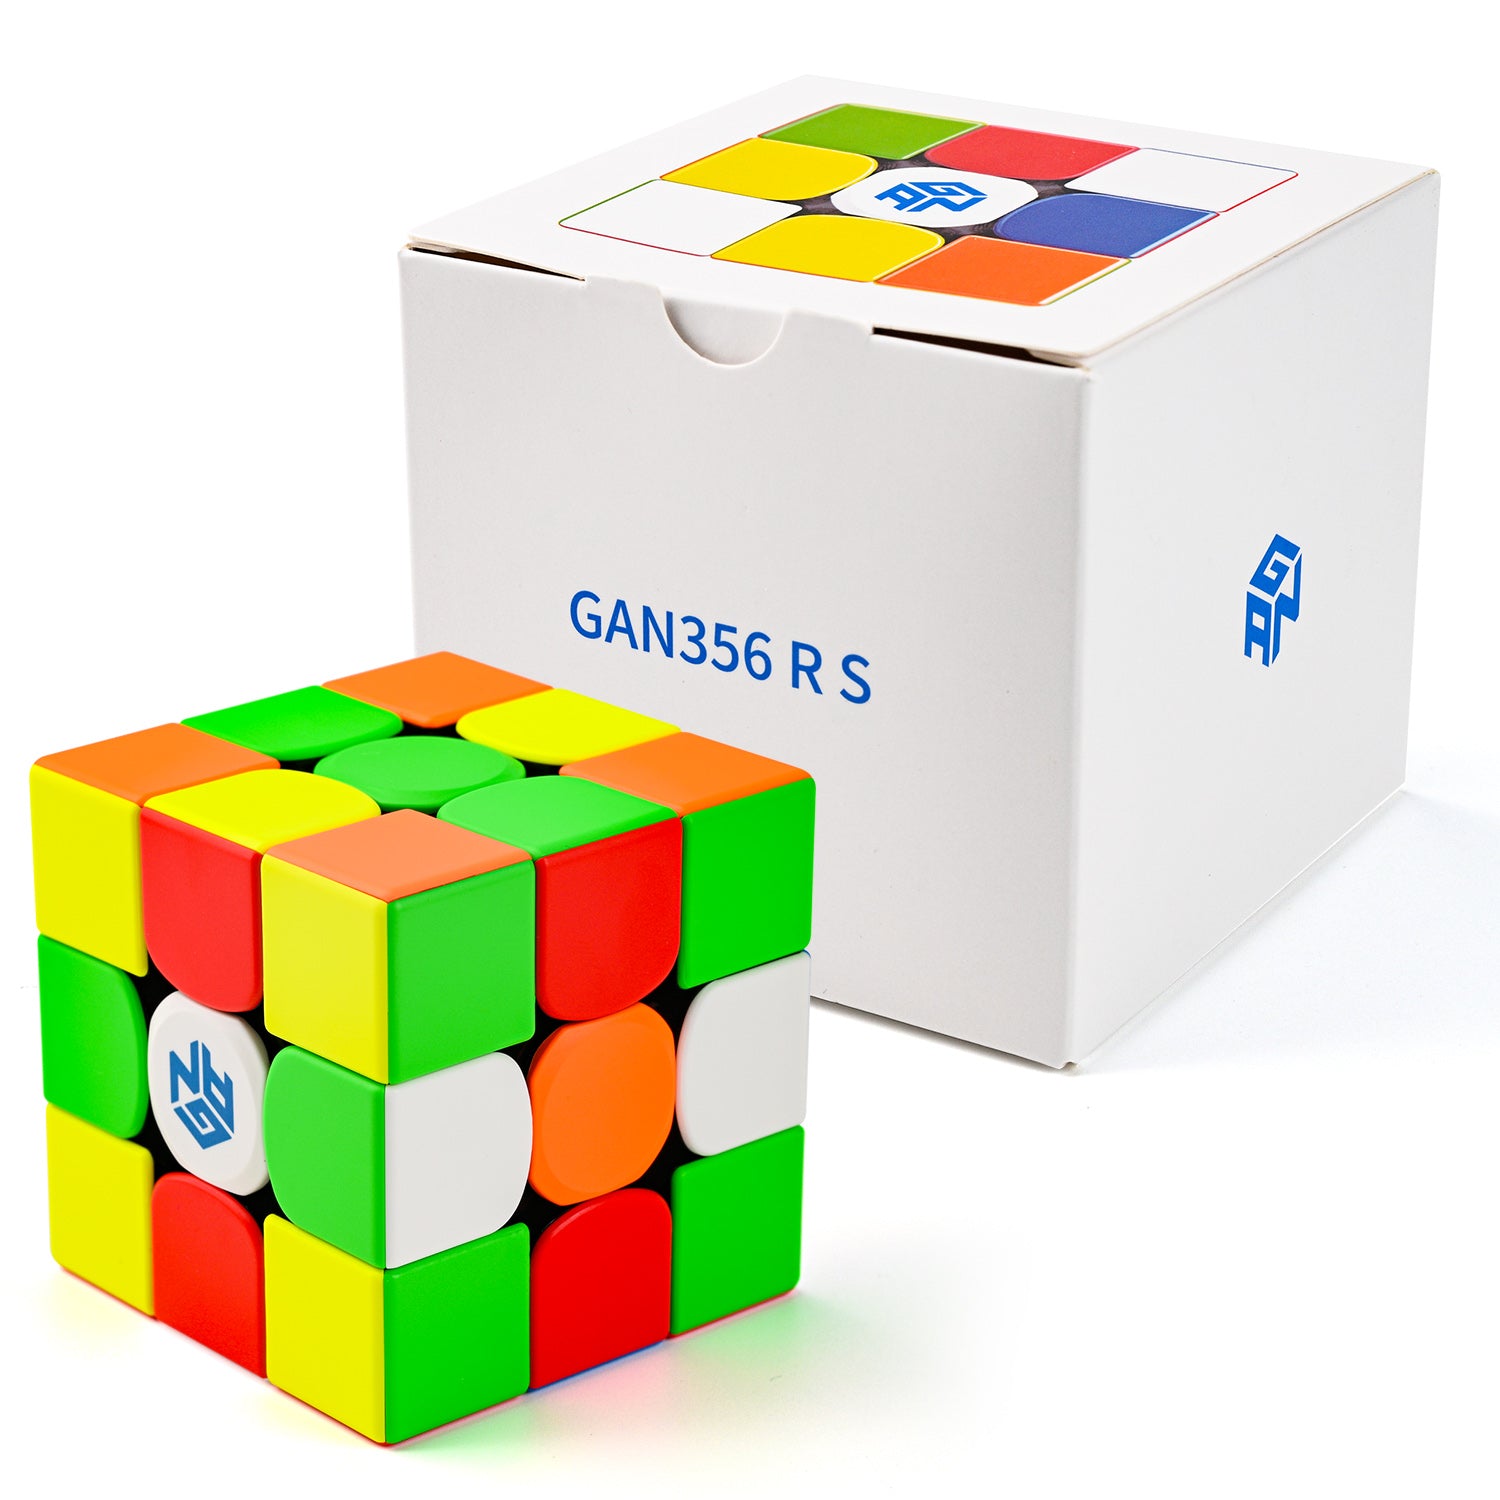 GAN 356 RS V2 3x3 Magnetic Speed Cube